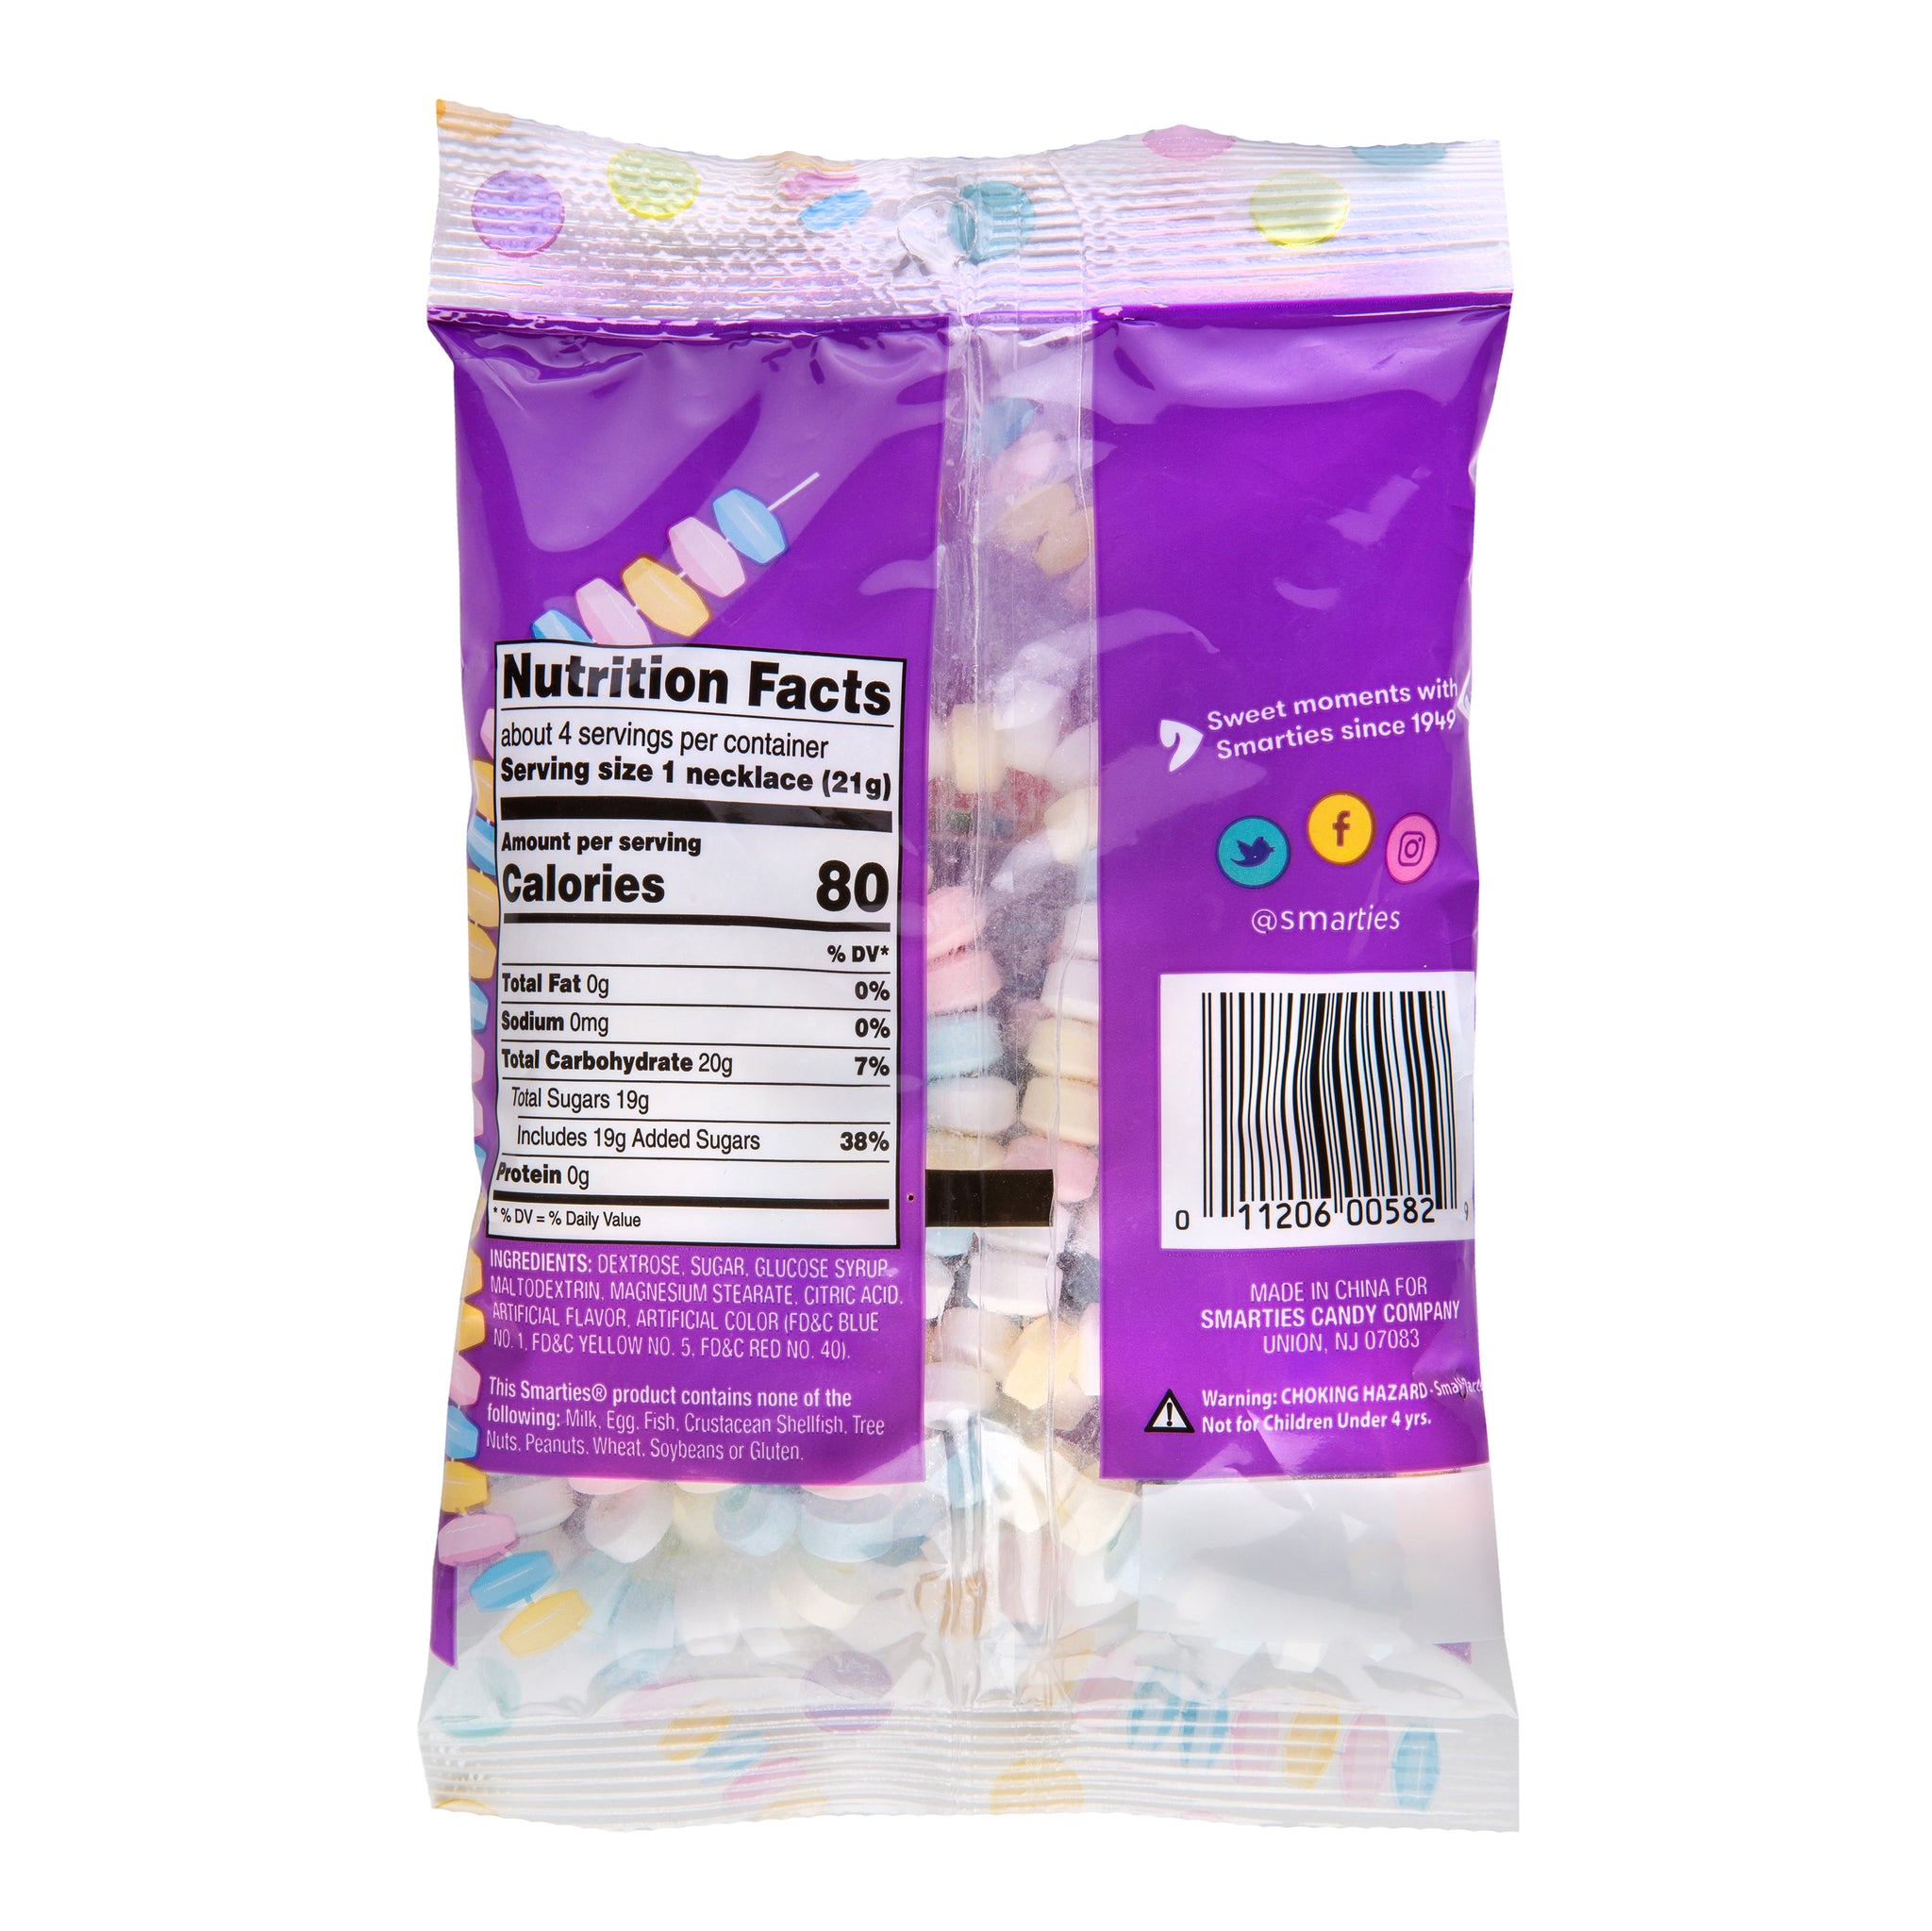 Smarties Candy Necklace - 25ct in Resealable Standup Candy Bag -  Individually Wrapped - Classic Flavors - Stretchable Hard Candy Necklace -  Old